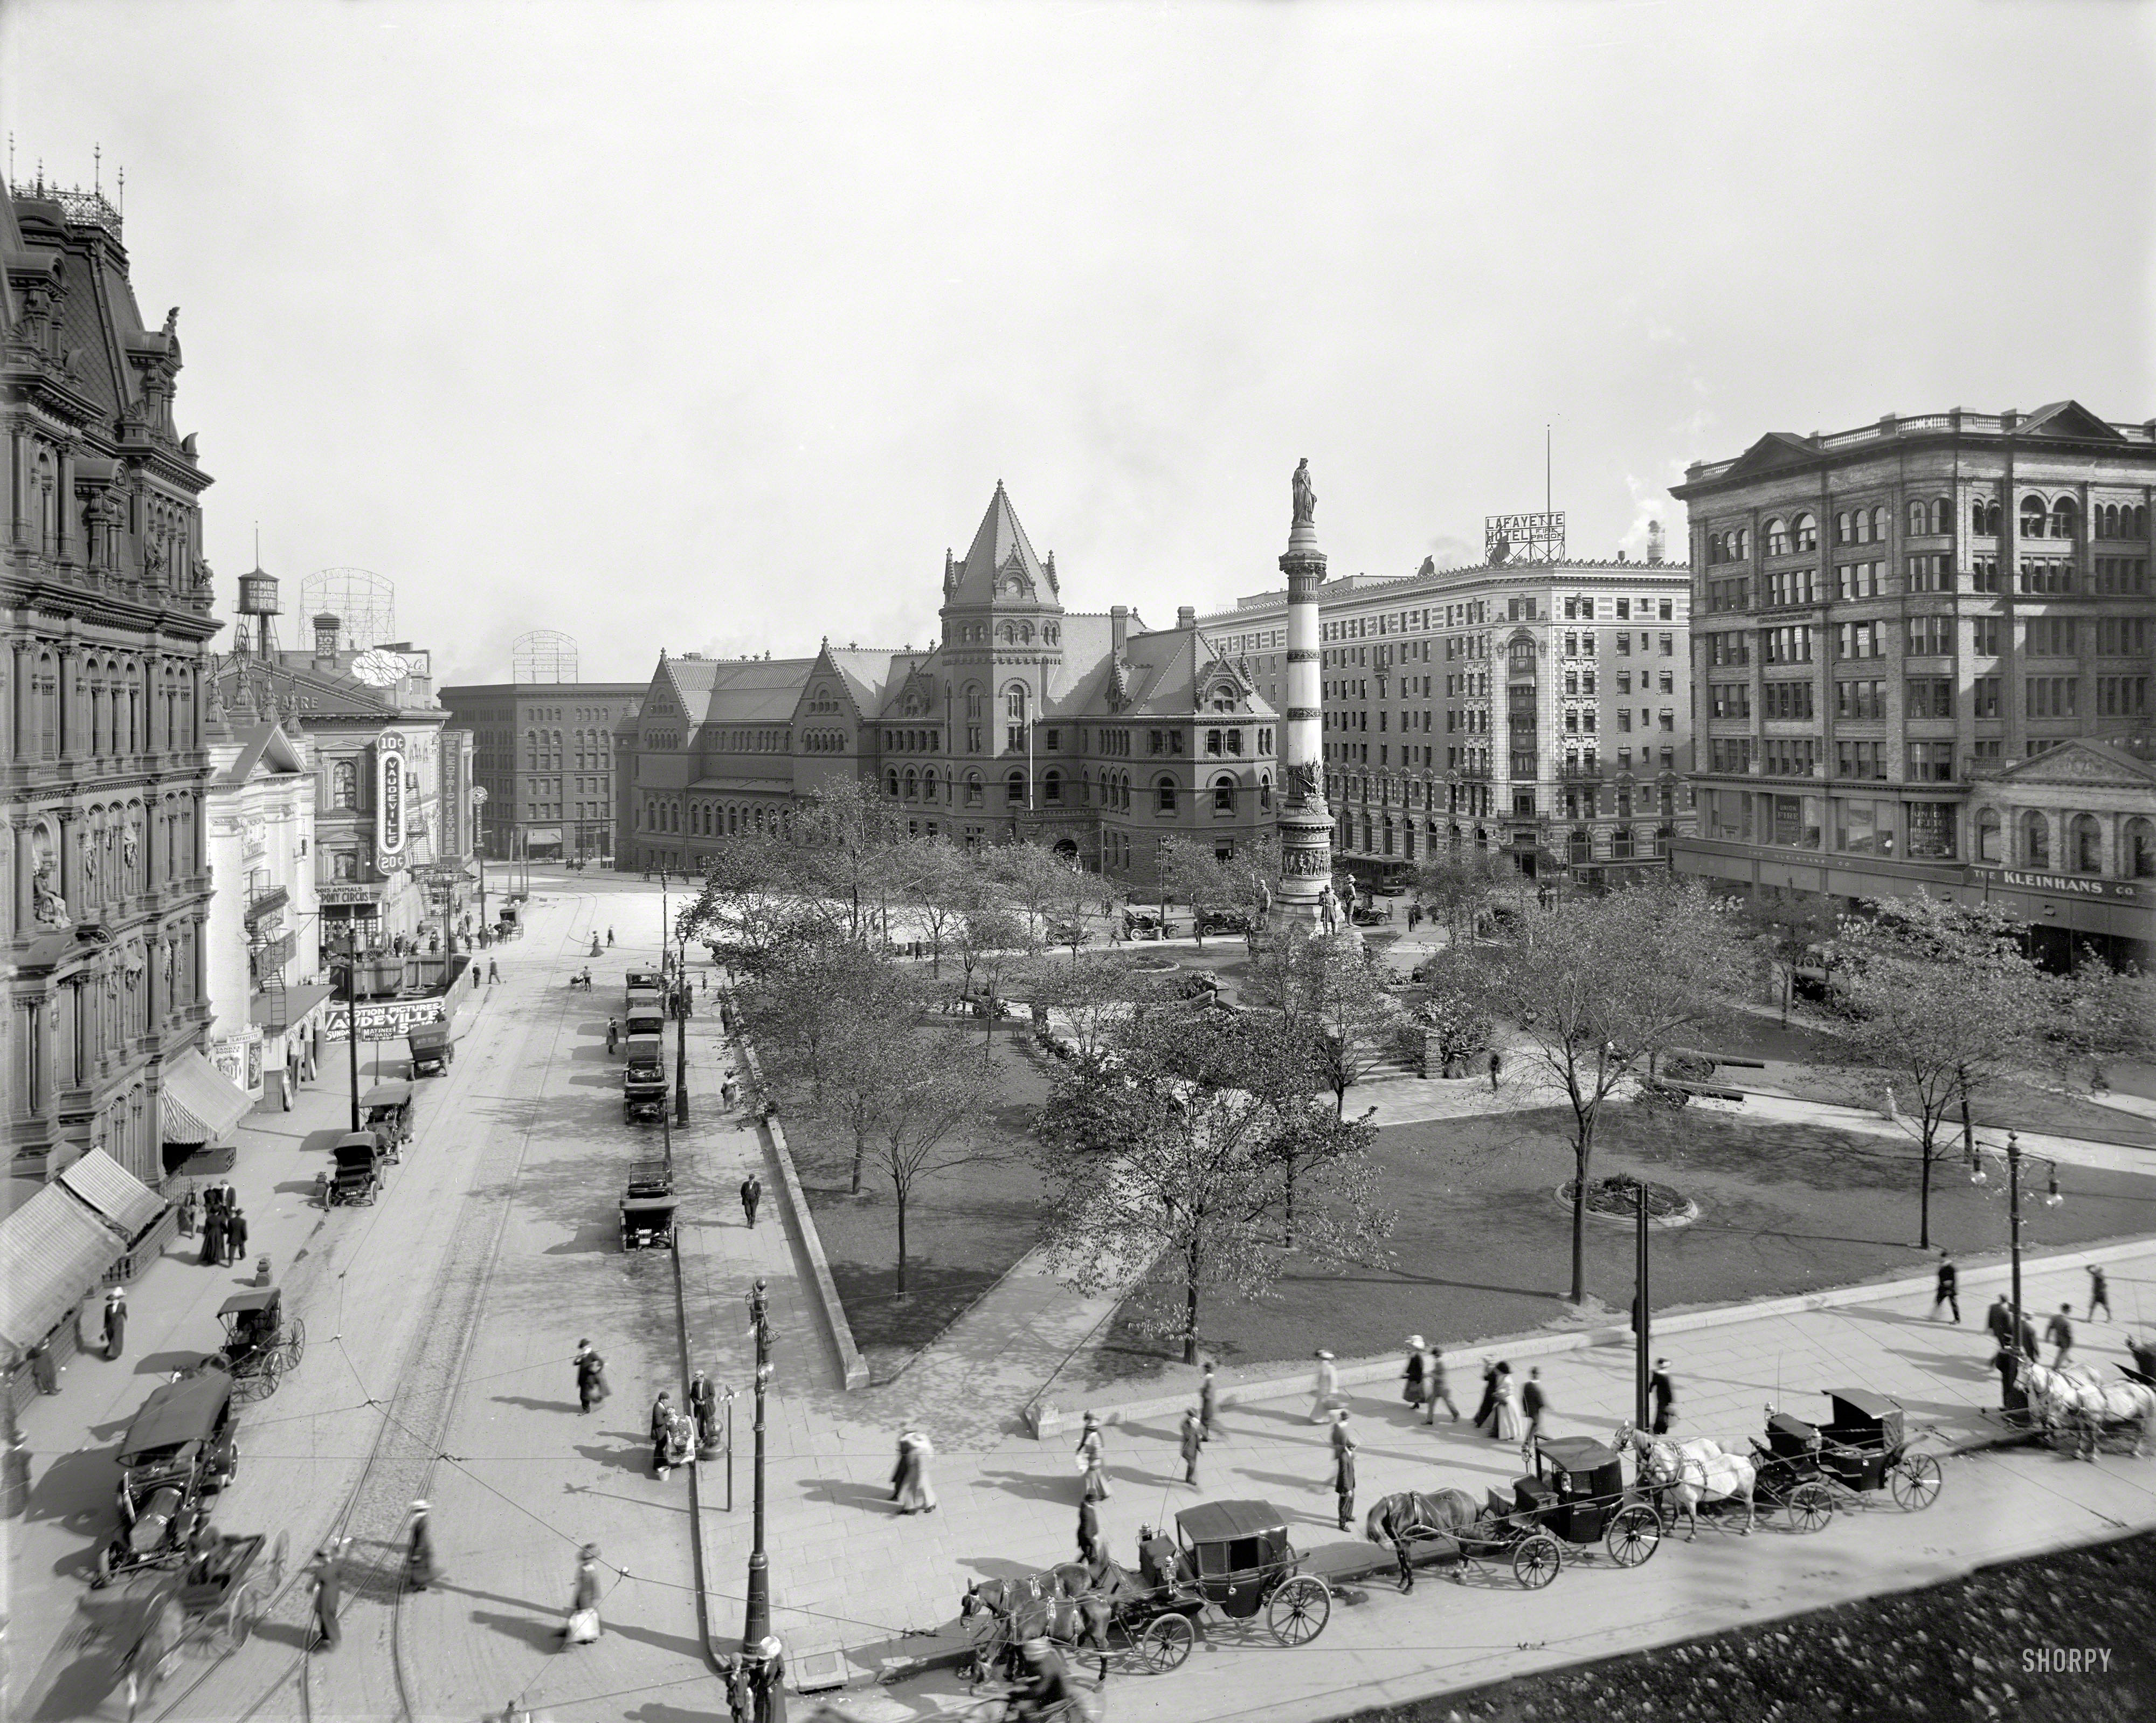 Buffalo, New York, circa 1911. "Lafayette Square." Where amusements include Motion Pictures, Vaudeville, a Pony Circus and, for the more practical-minded, Gas & Electric Fixtures. 8x10 inch glass negative. View full size.